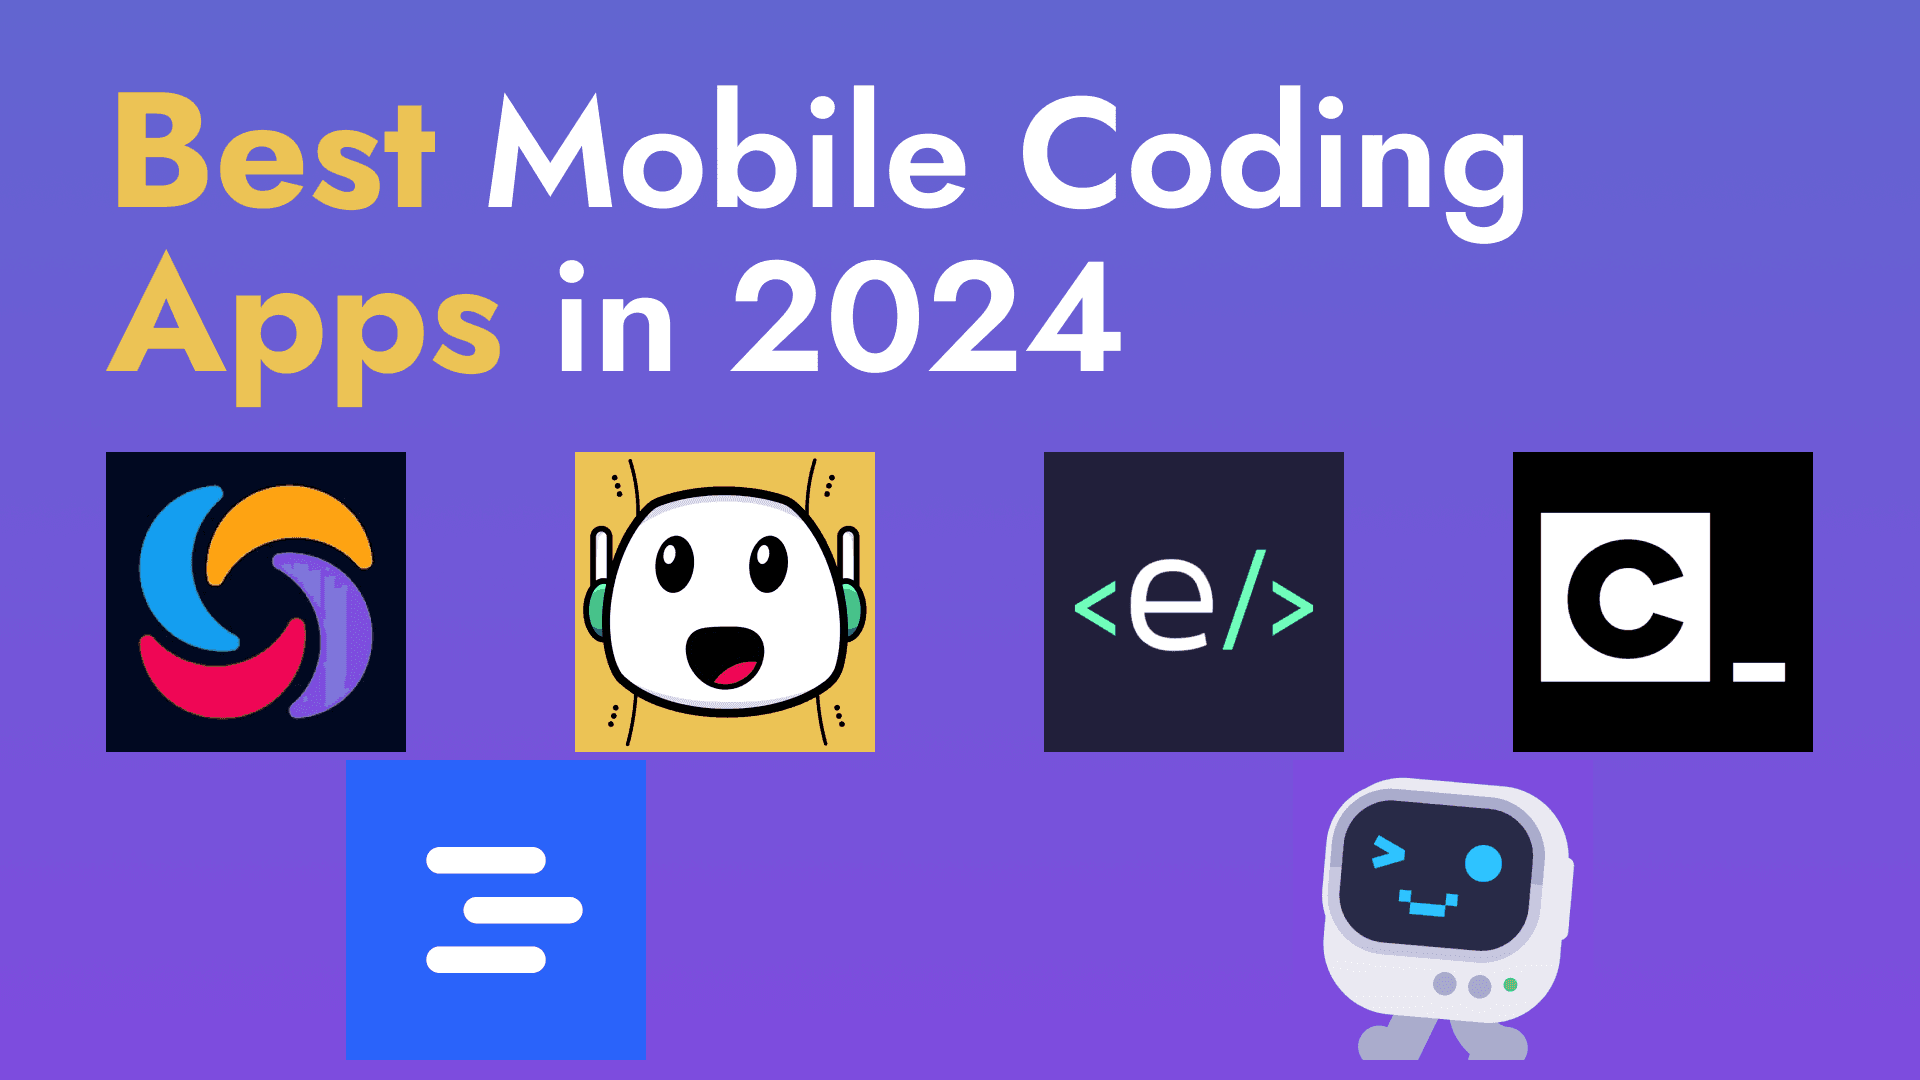 Best Mobile Coding Apps in 2024